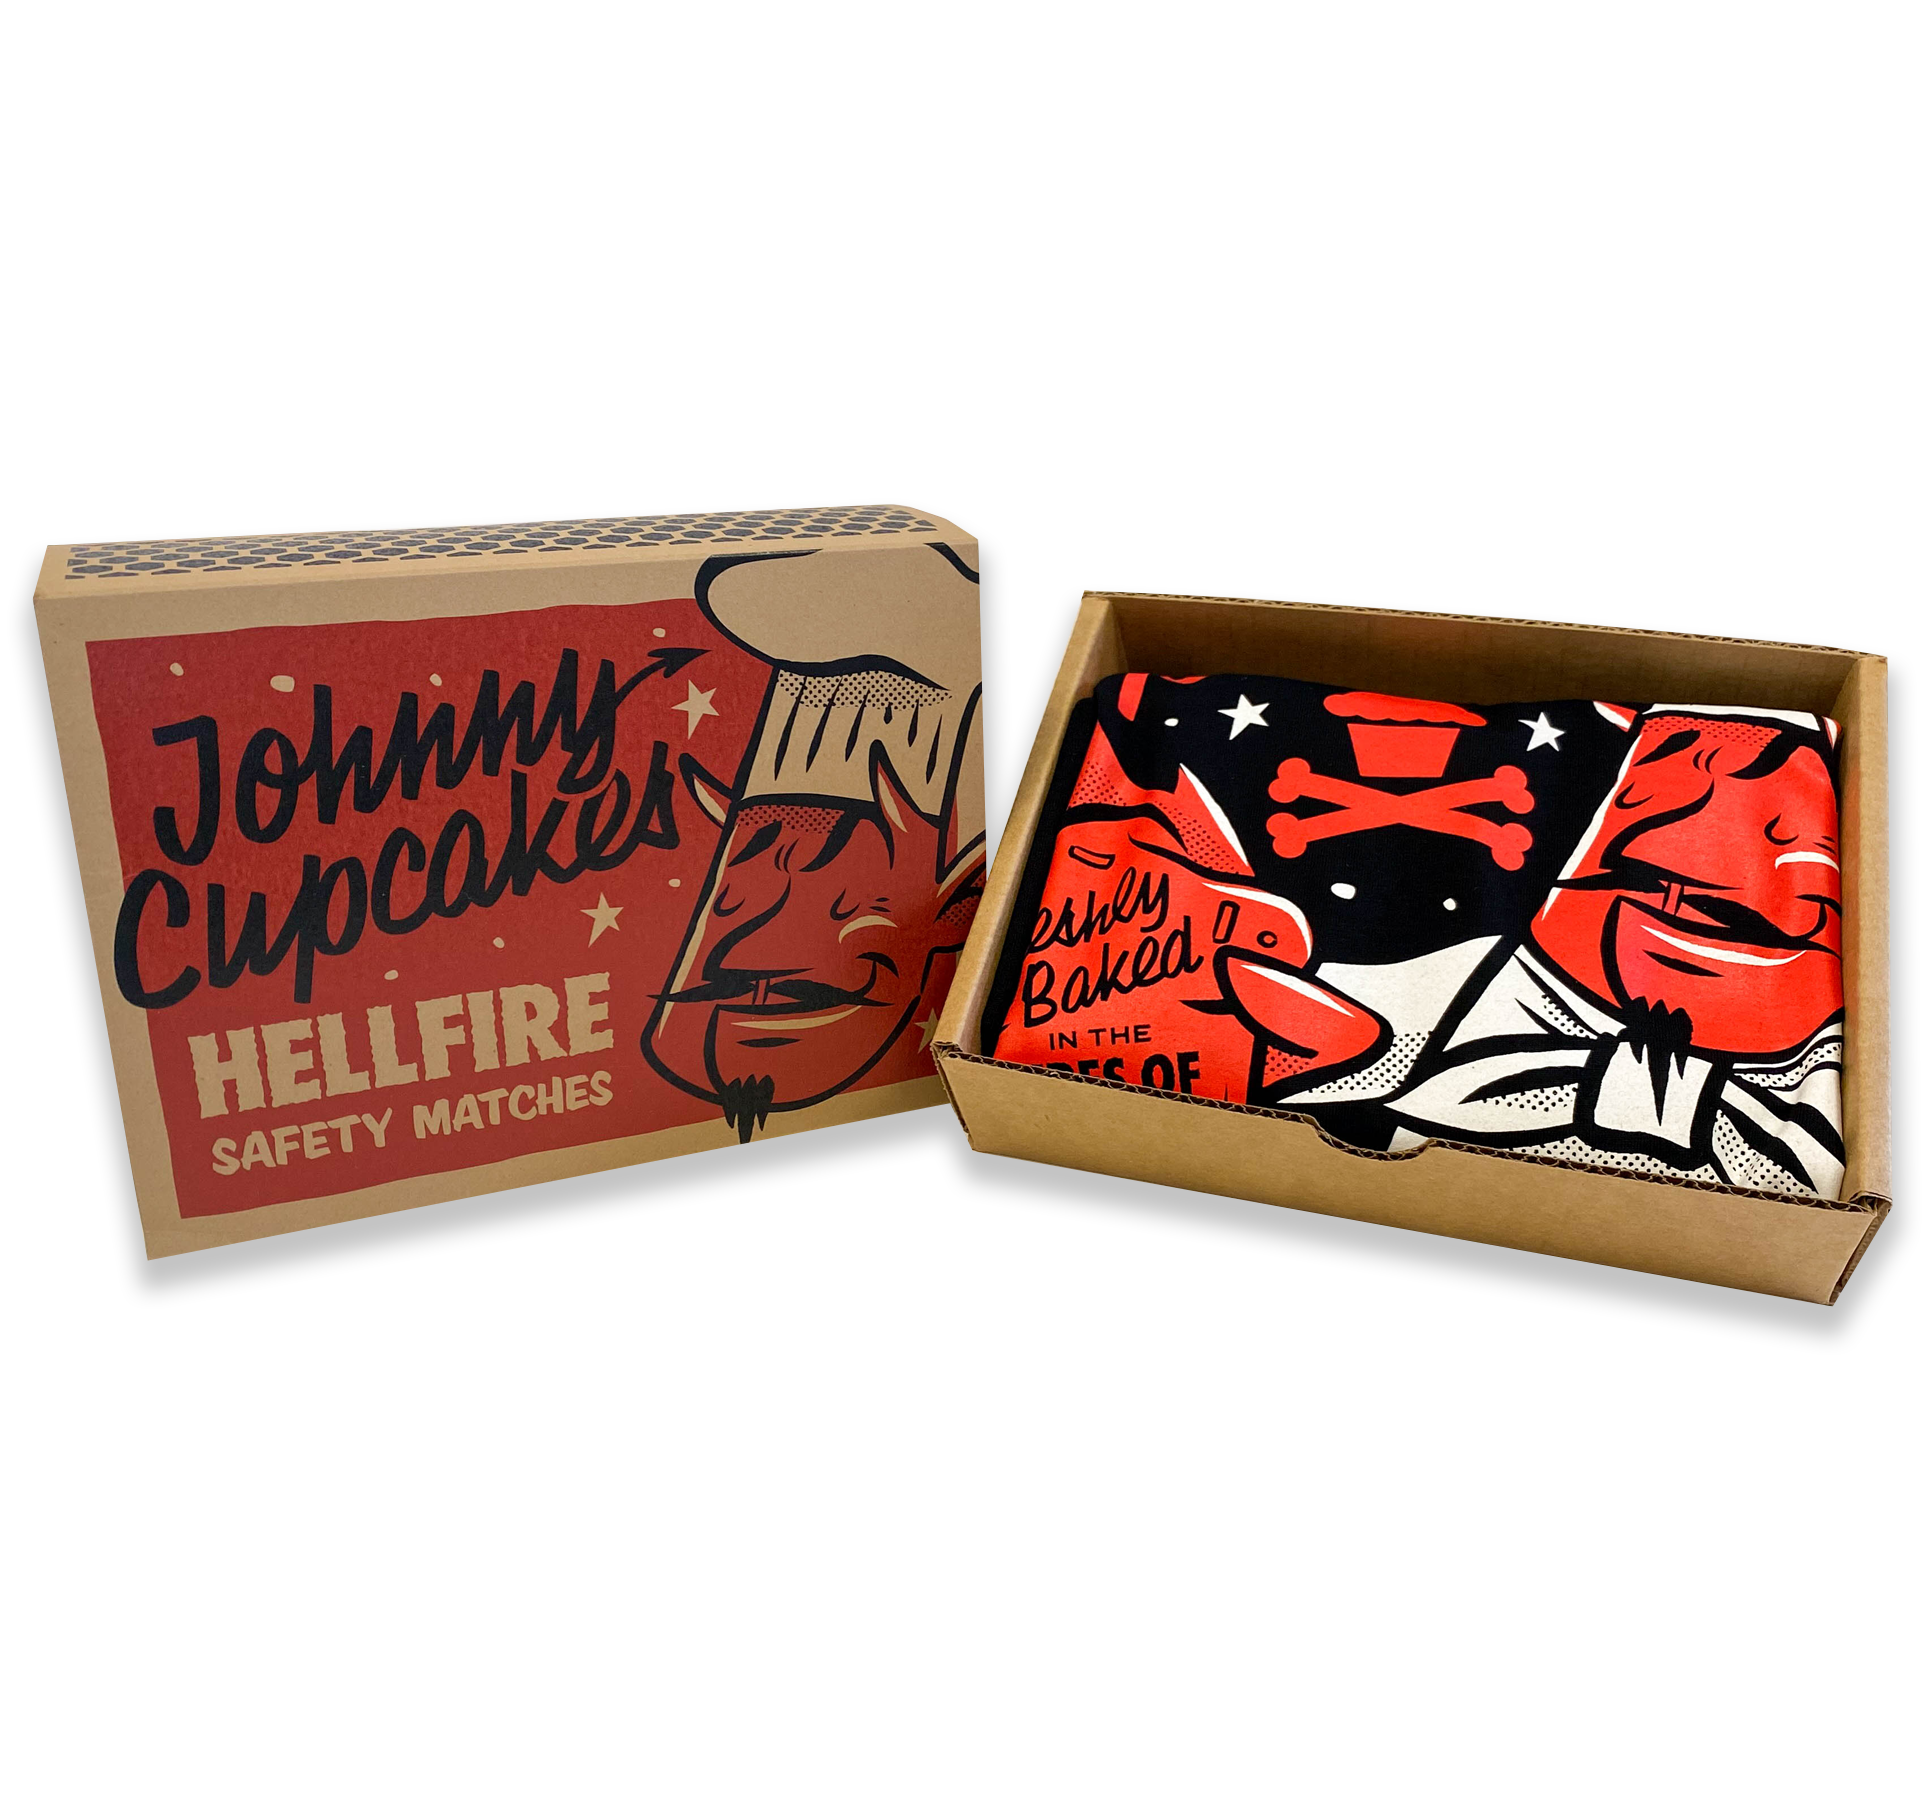 Flame Grilled Devil w/ Matchbox Packaging